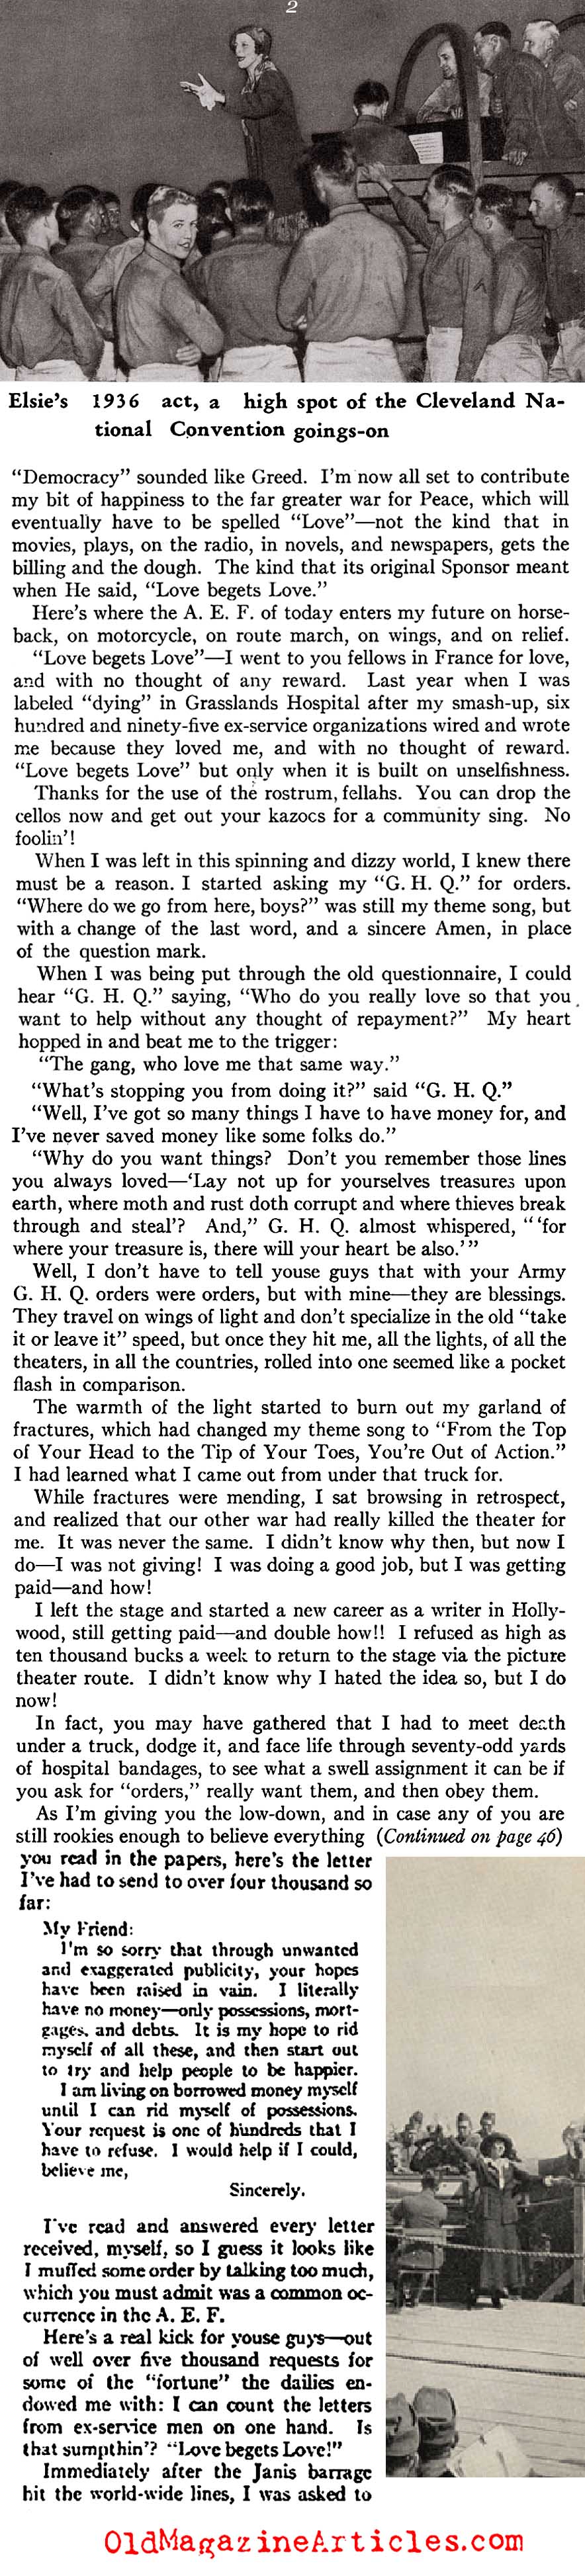 Elsie Janis Entertained the Doughboys  (American Legion Monthly, 1936)